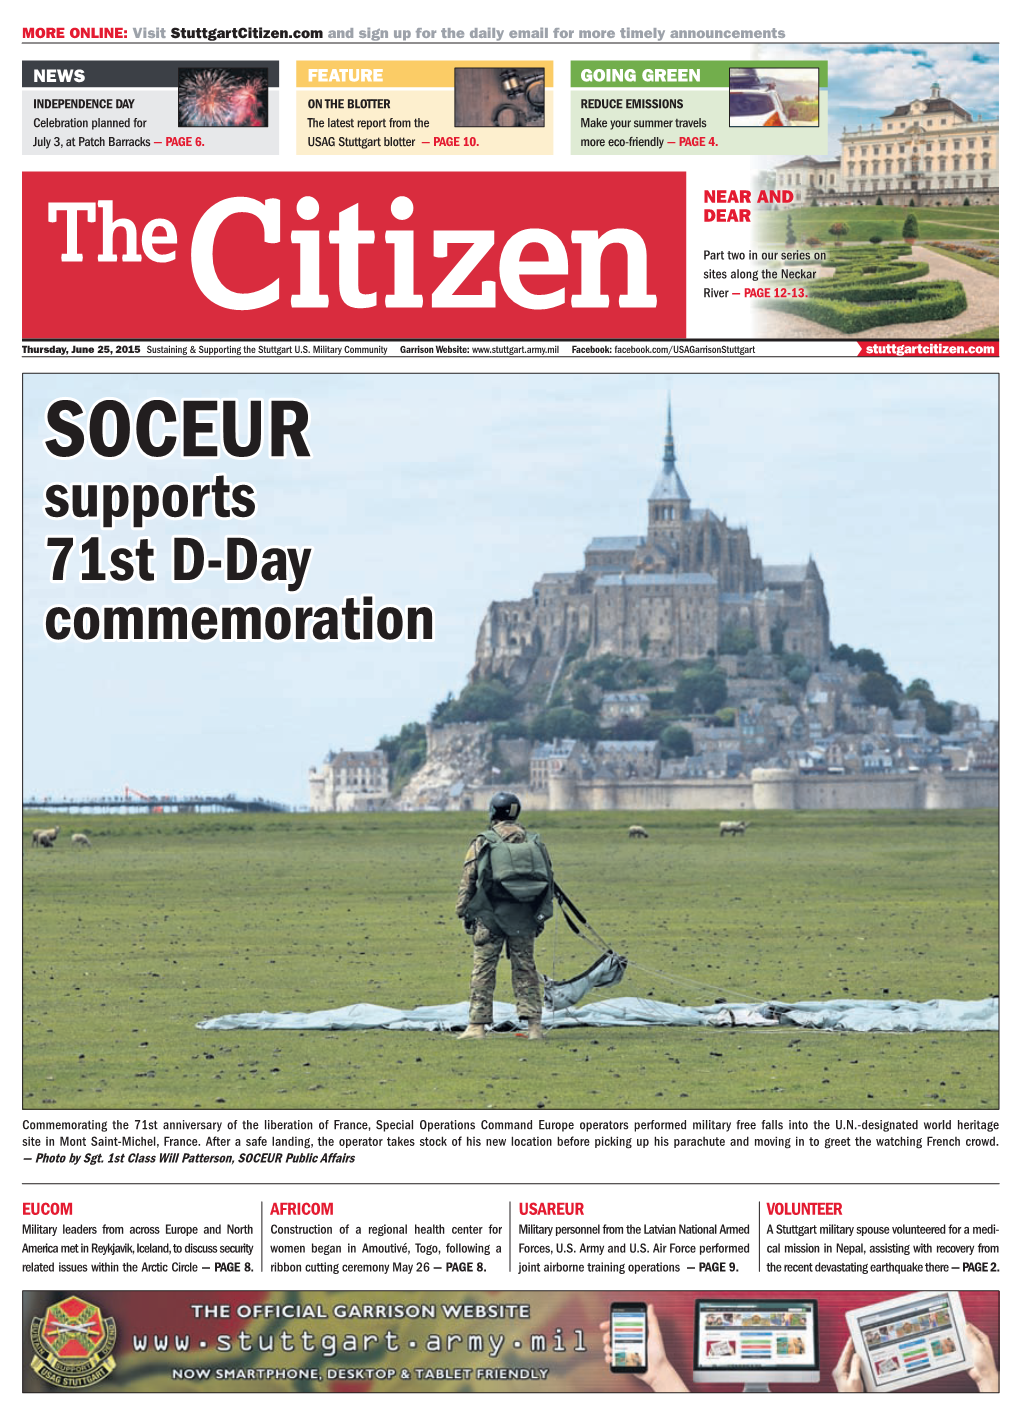 SOCEUR Supports 71St D-Day Commemoration